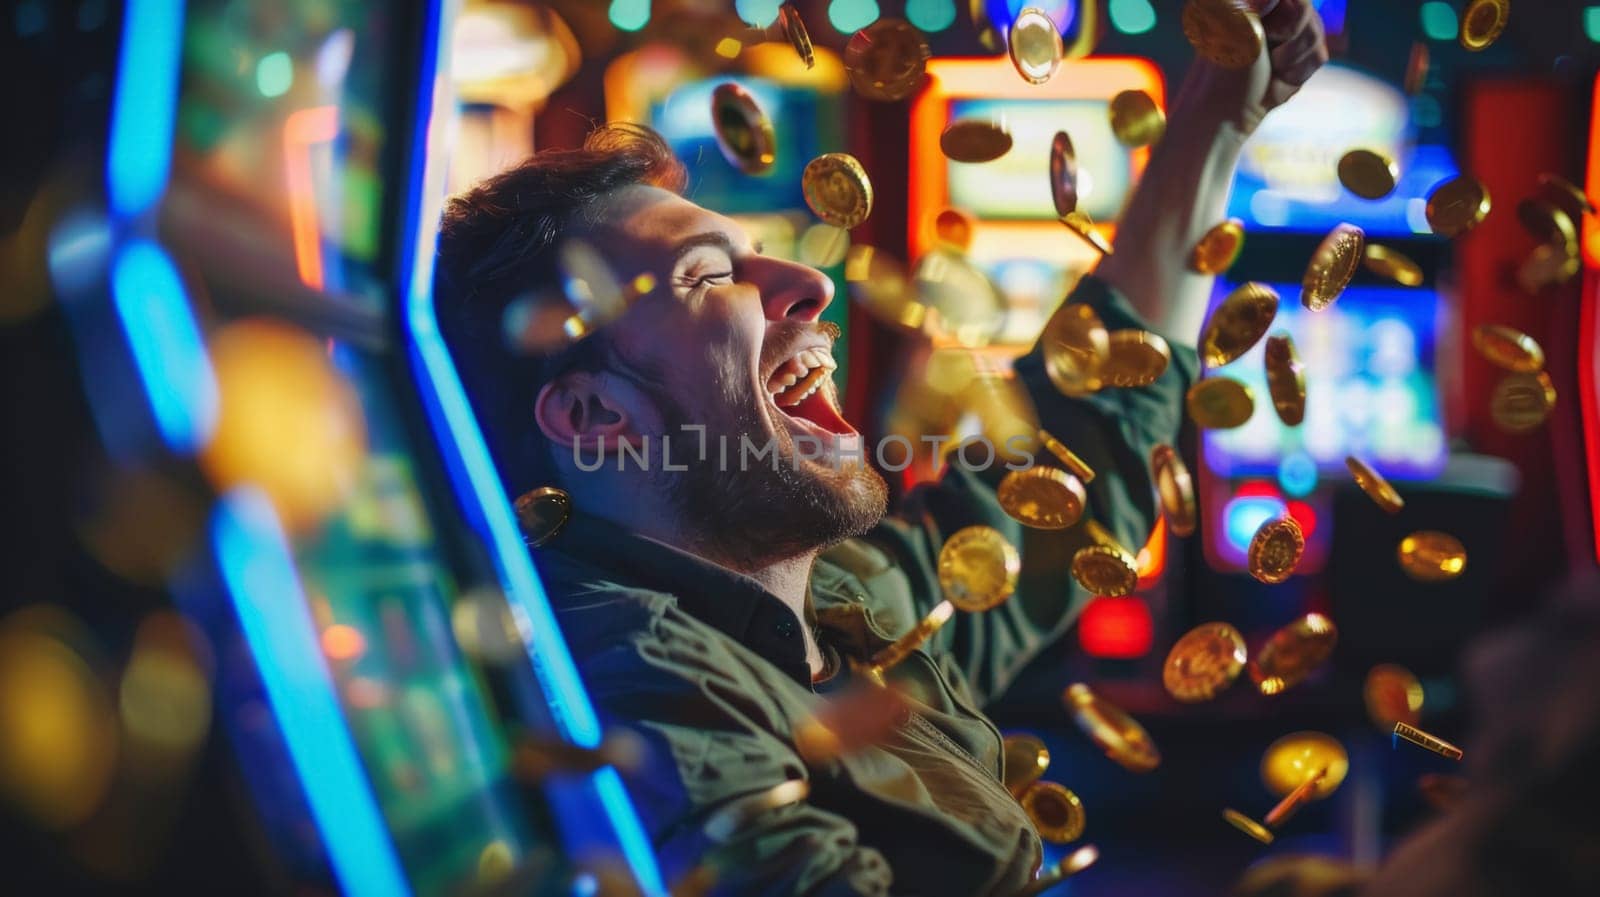 A young man exudes extreme joy with a wide-open mouth, laughing as he is showered with golden coins in a lively casino setting.